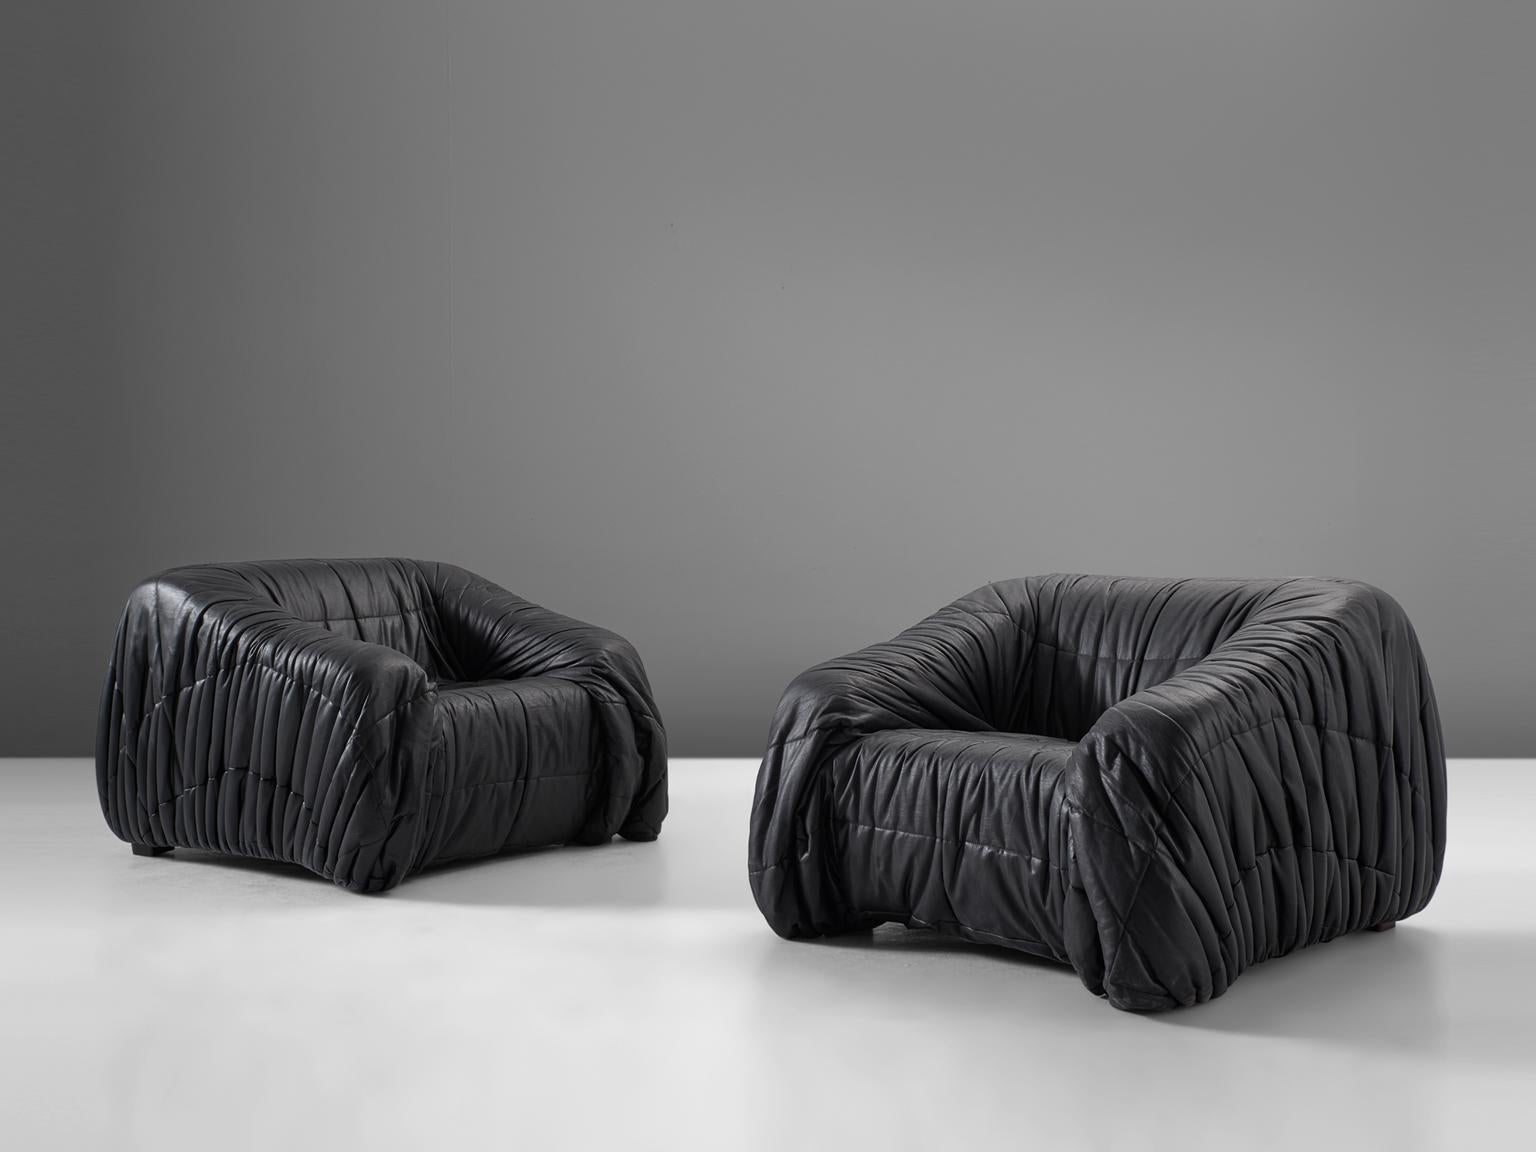 De Pas, D'urbino and Lomazzi Pair of Lounge Chairs in Black Leatherette